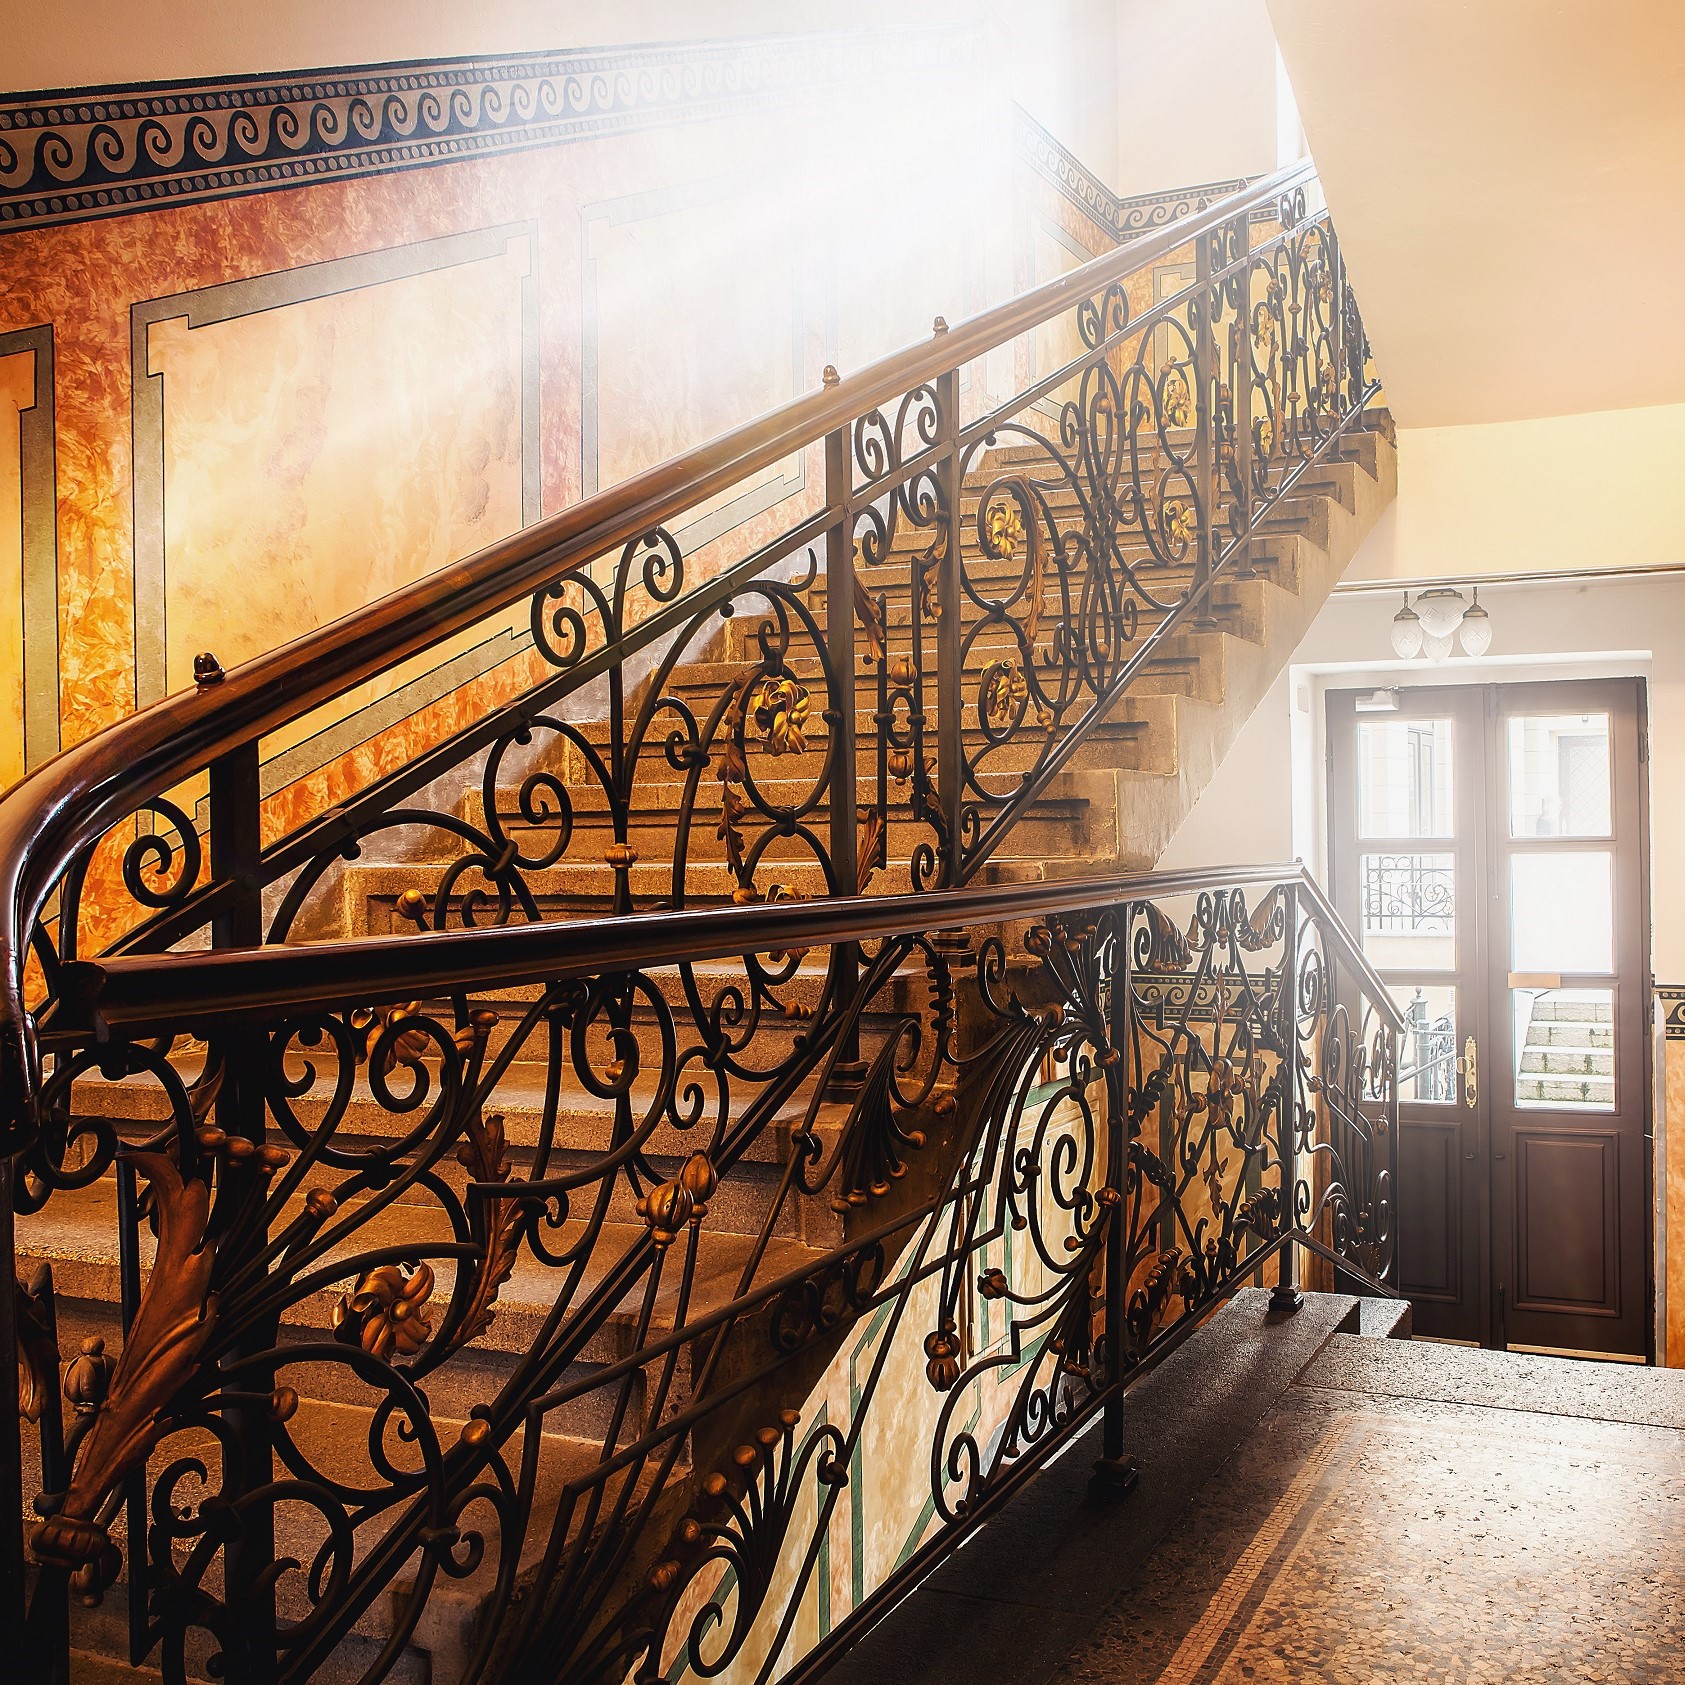 Classic And Elegant Stairs In Hallway With Sunlights Througn Window. Building Interior Of European Style In Resident House